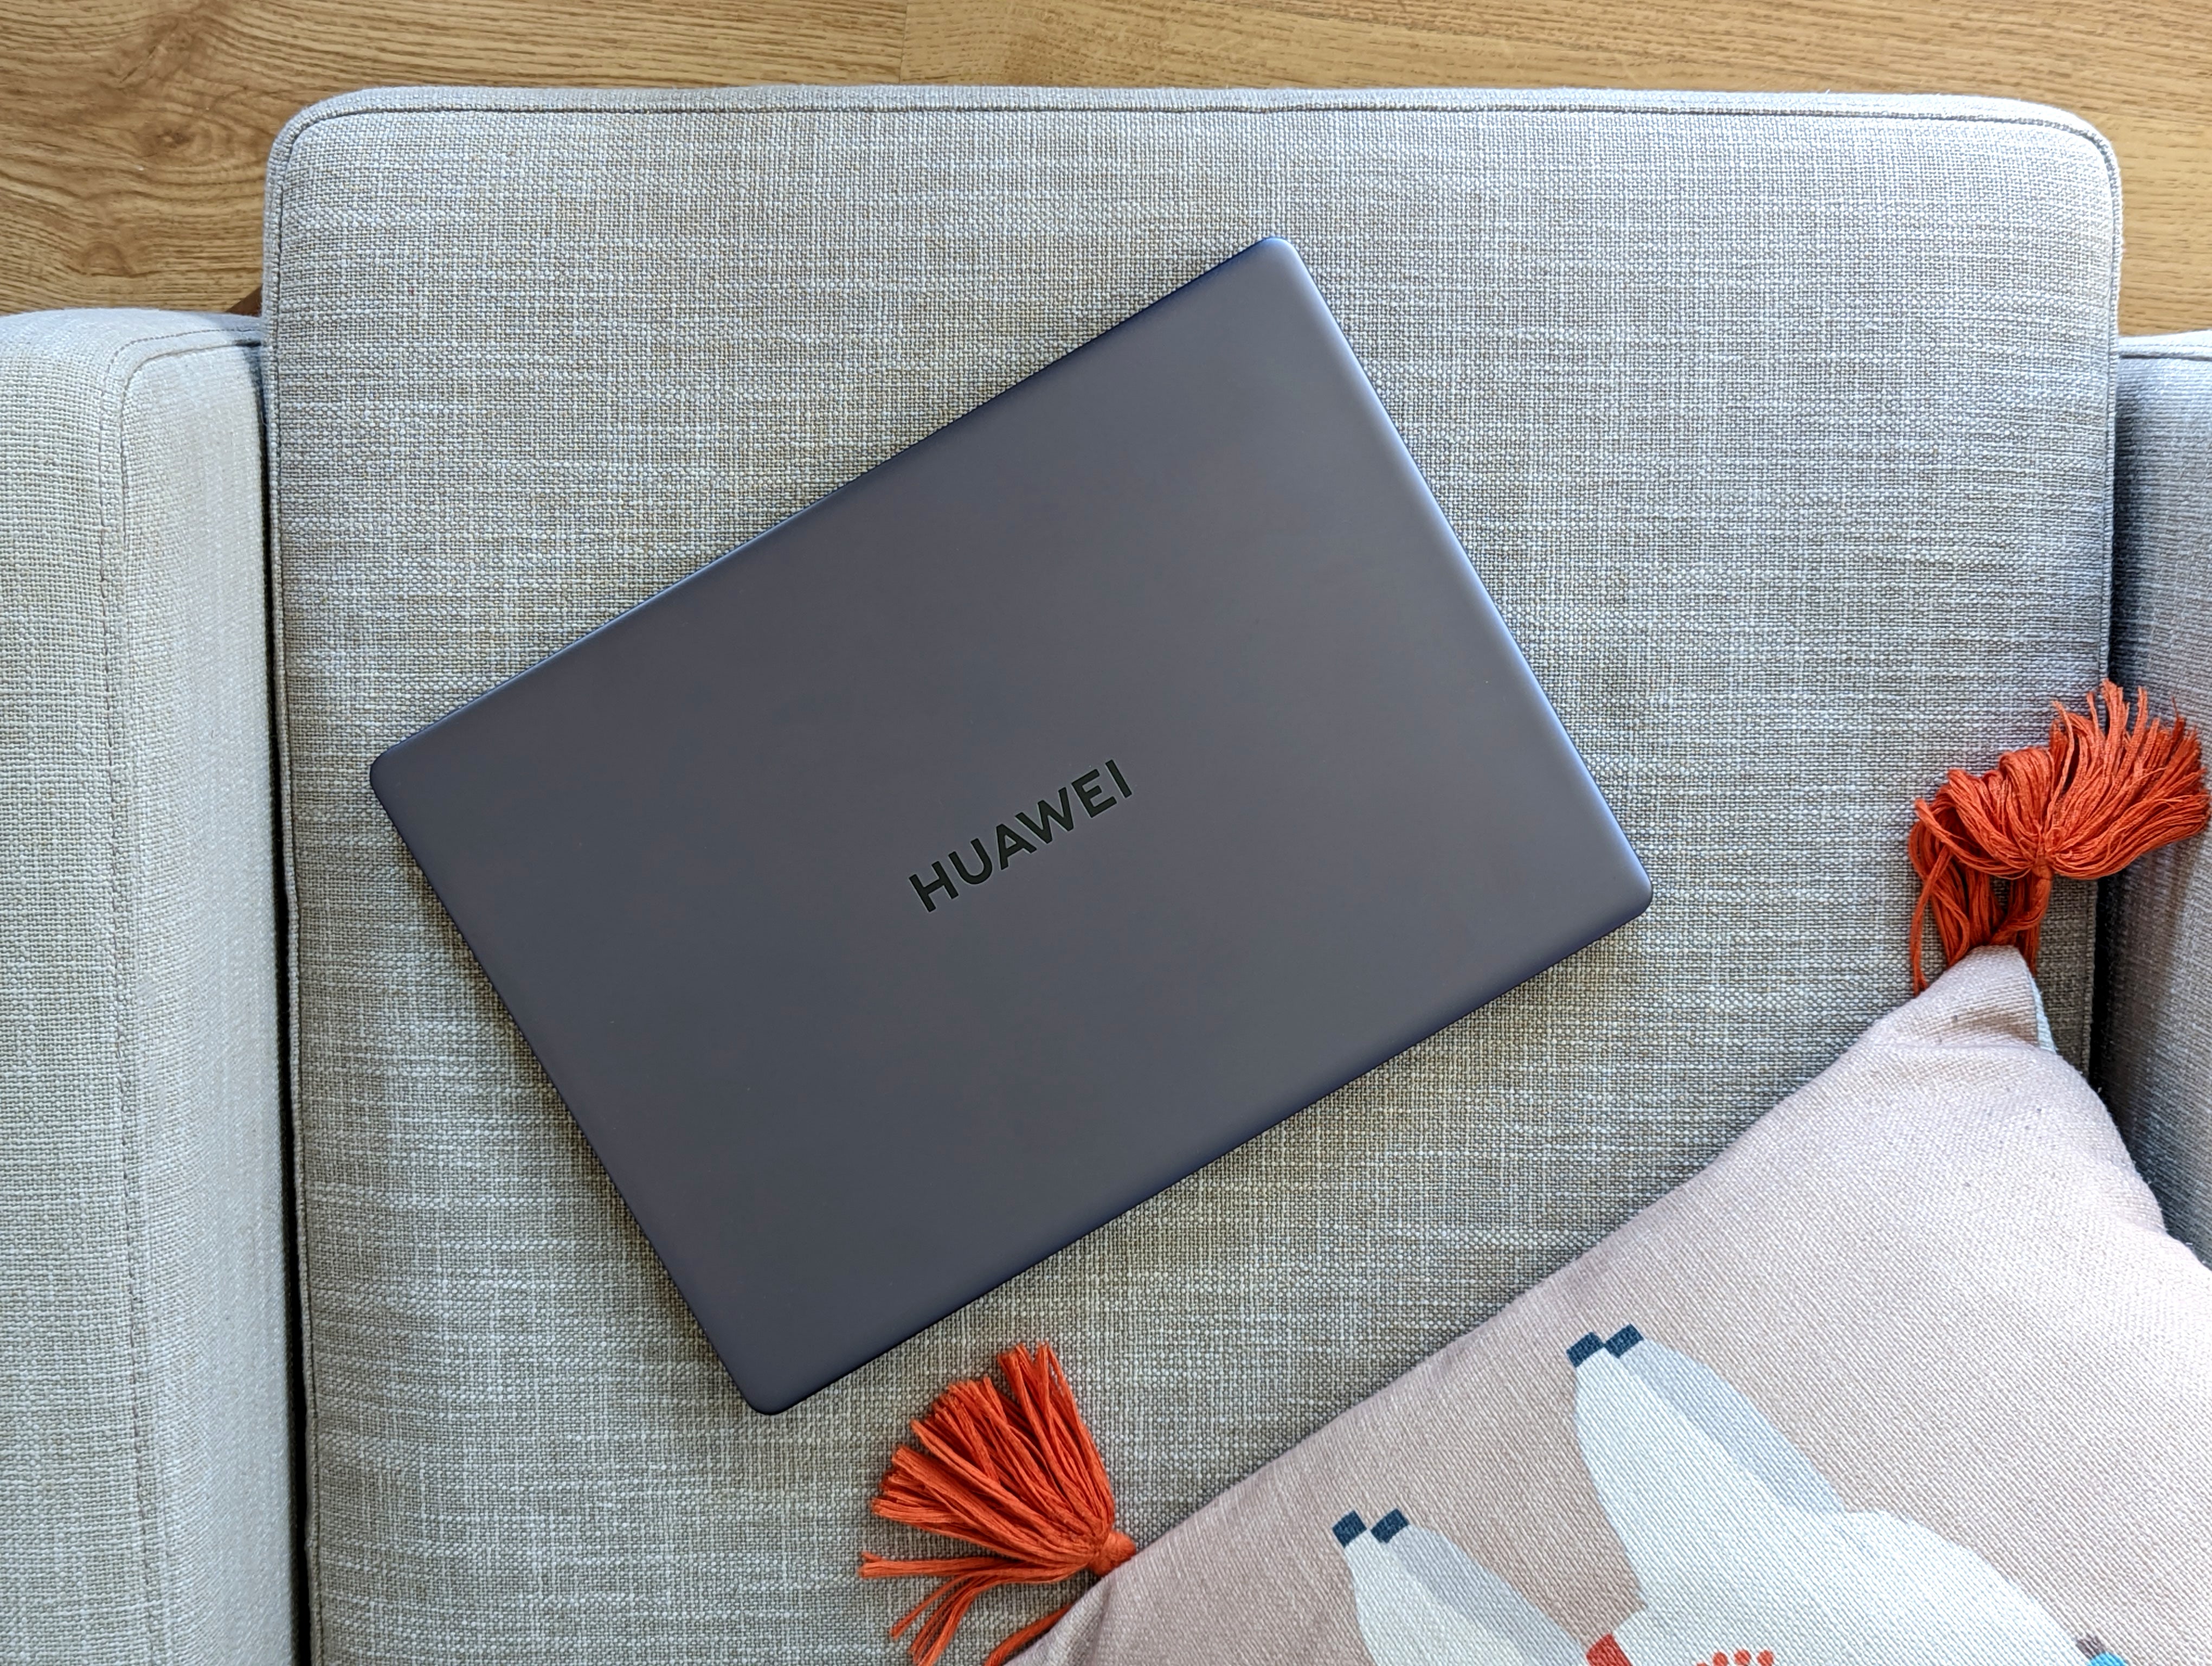 The matebook 14s drops to a 60Hz refresh rate if your battery is running low